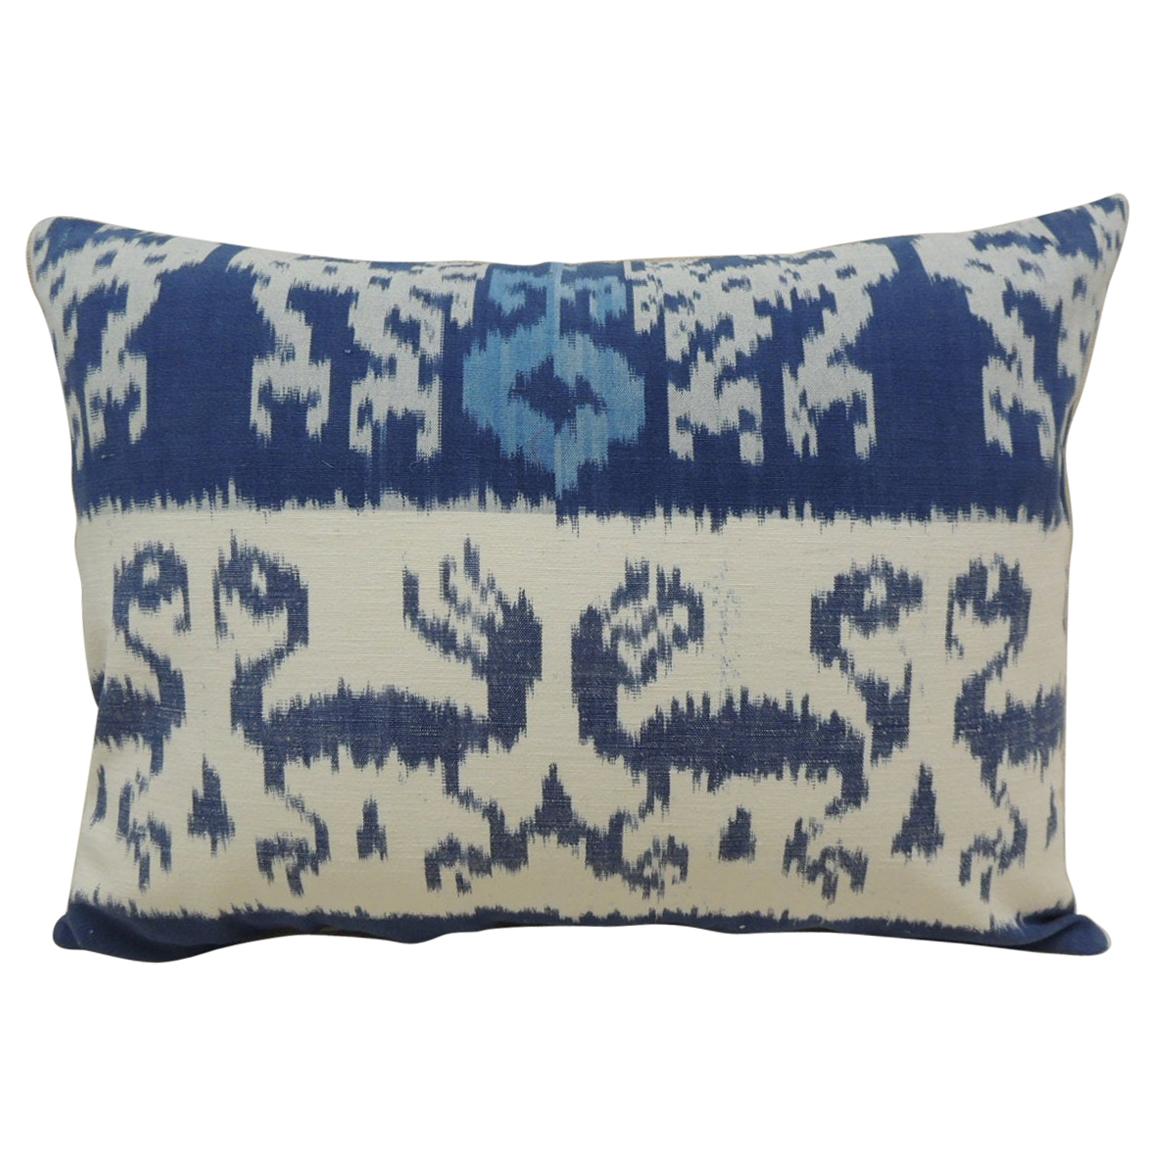 Vintage Blue and White Ikat Decorative Bolster Pillow